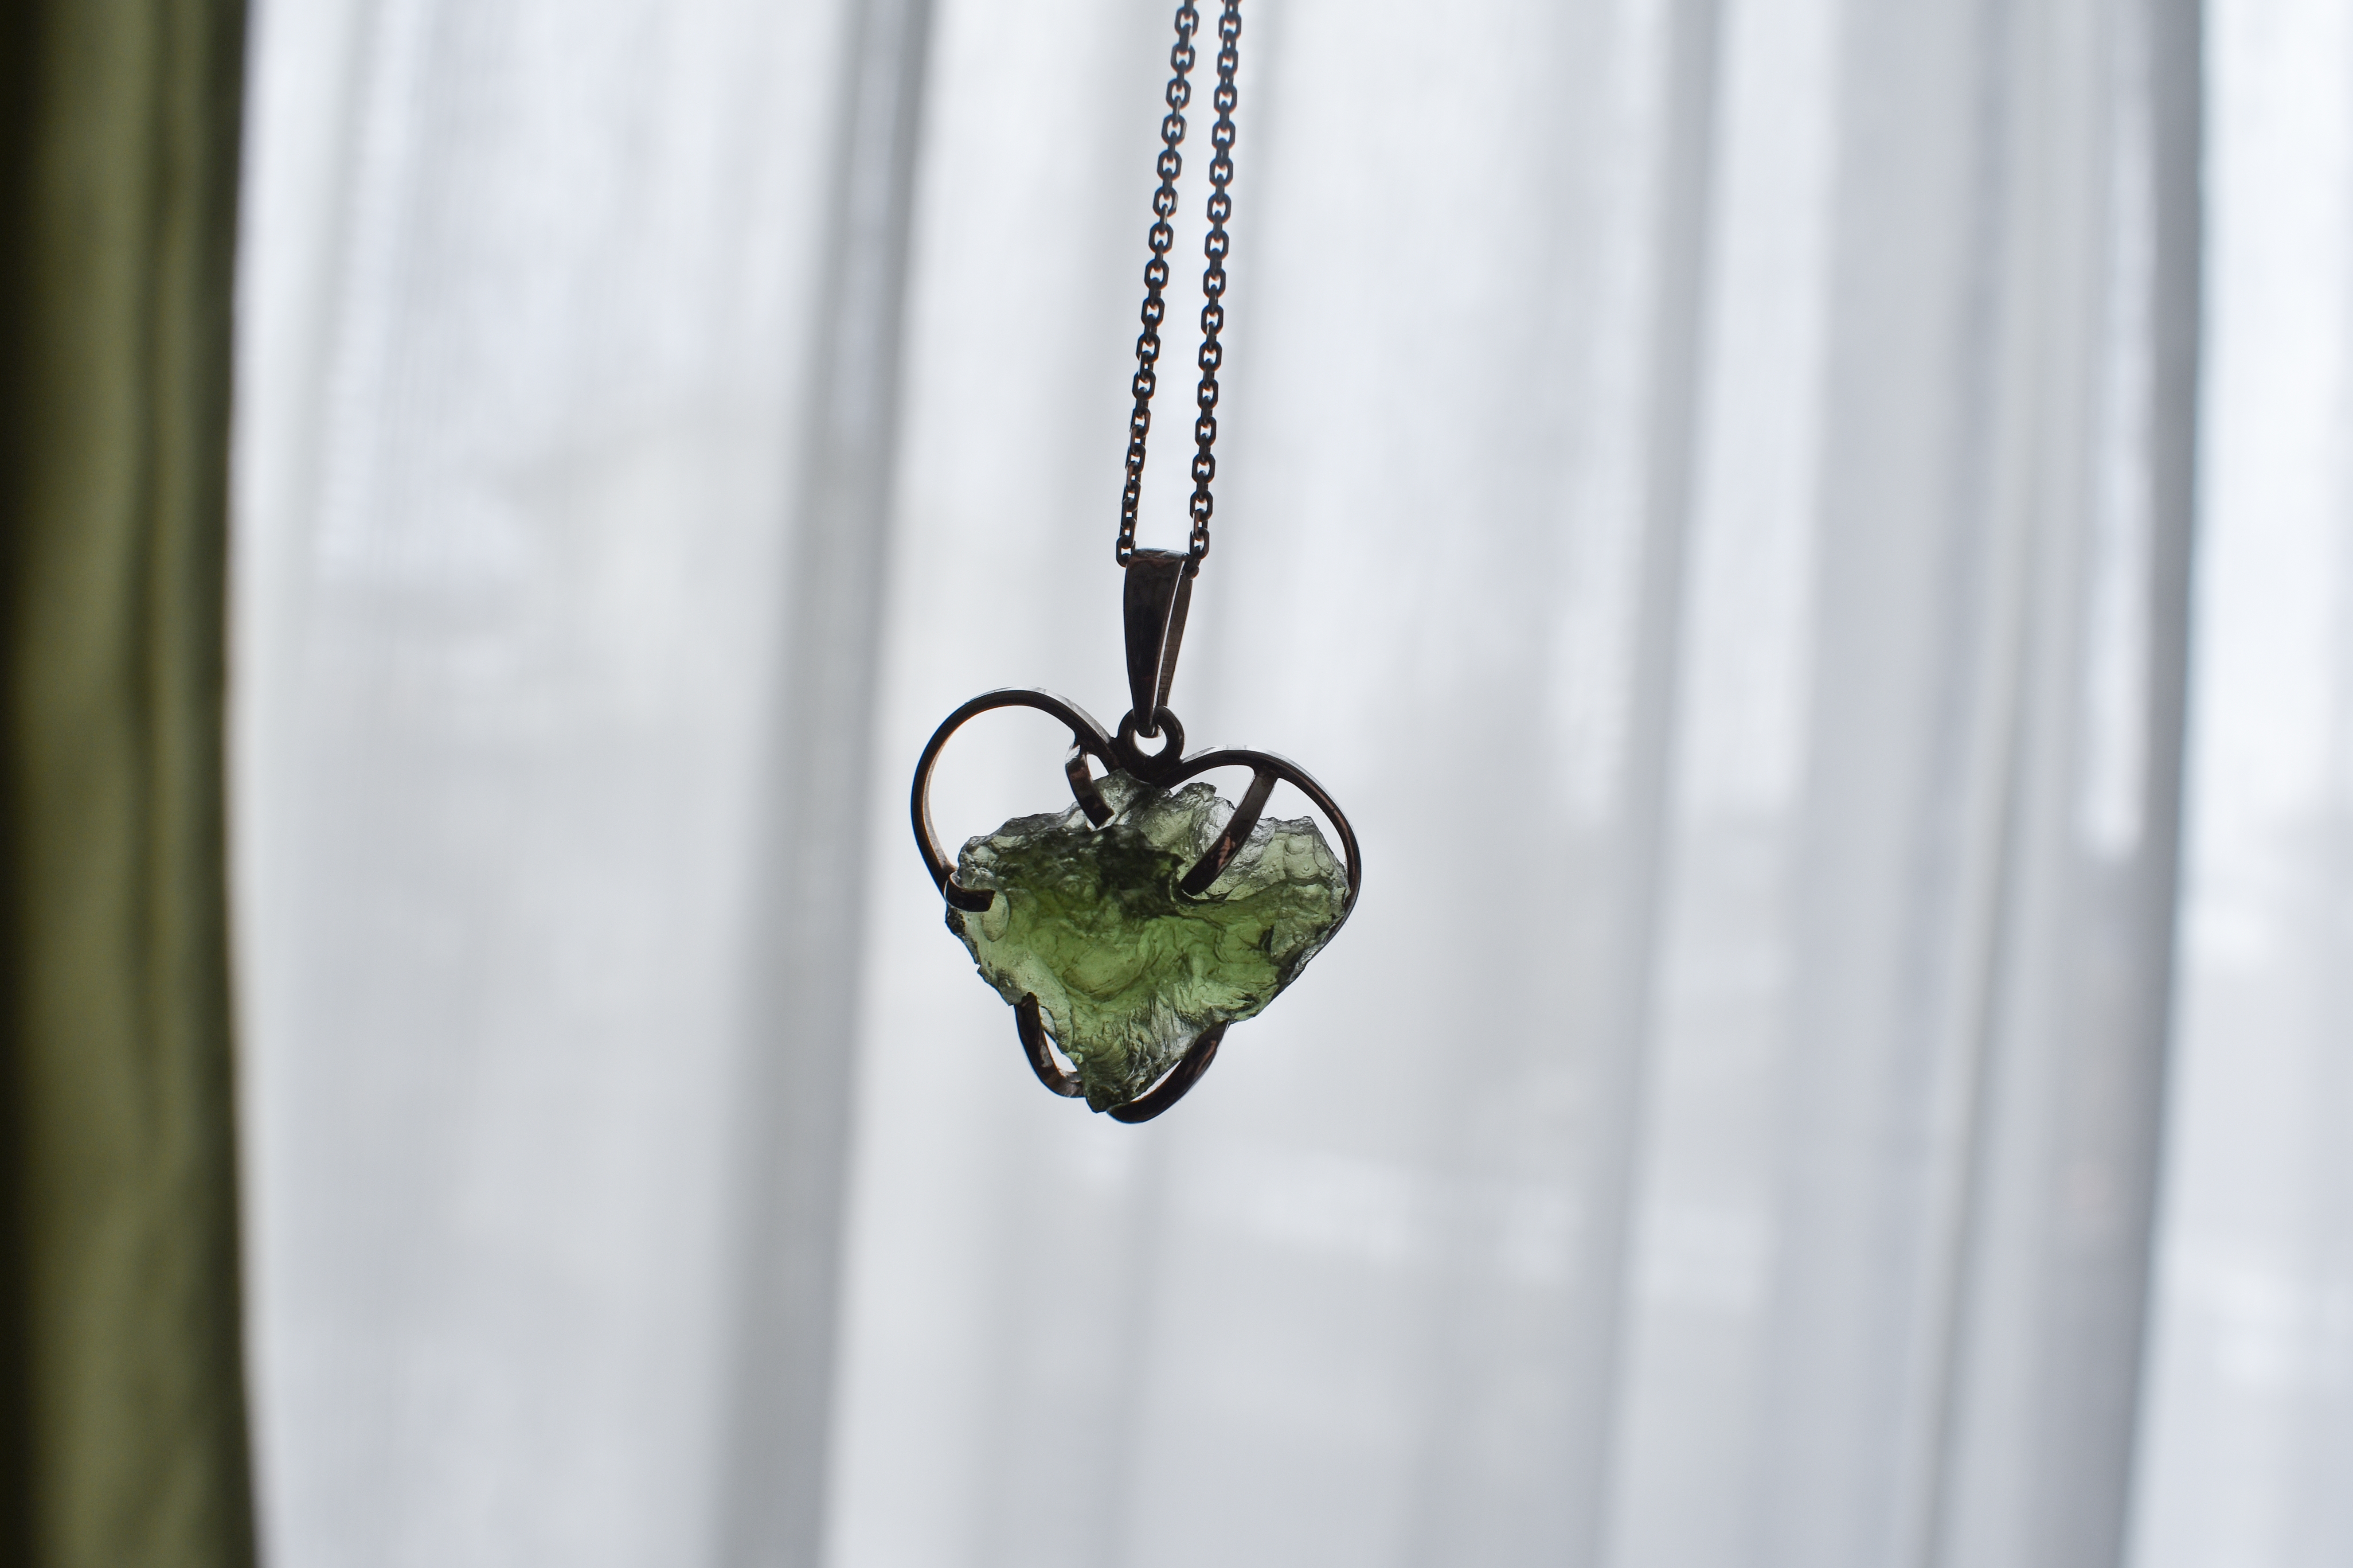 Photo of moldavite used as the pendant of jewelry | Source: Shutterstock